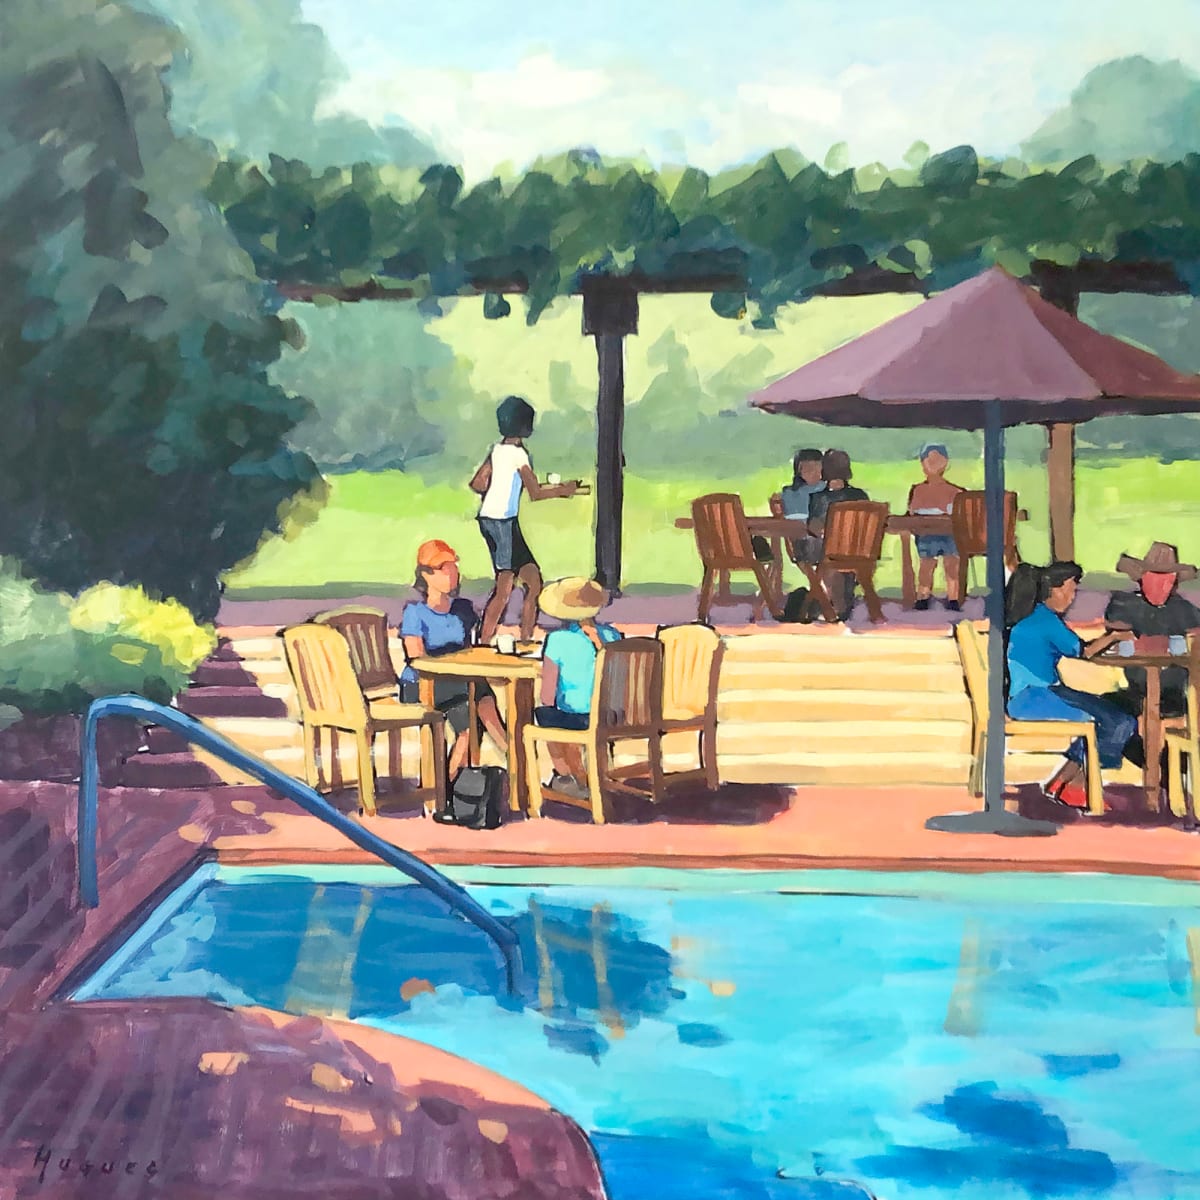 Breakfast at the Ranch - Tecate by Linda Hugues  Image: The foothills of Rancho La Puerta in northern Mexico is my favorite fitness resort. This painting shows guests after our morning walk enjoying a breakfast by the pool, a scene of warm sunlight, deep shade, aqua water, and the light blue sky of early morning.